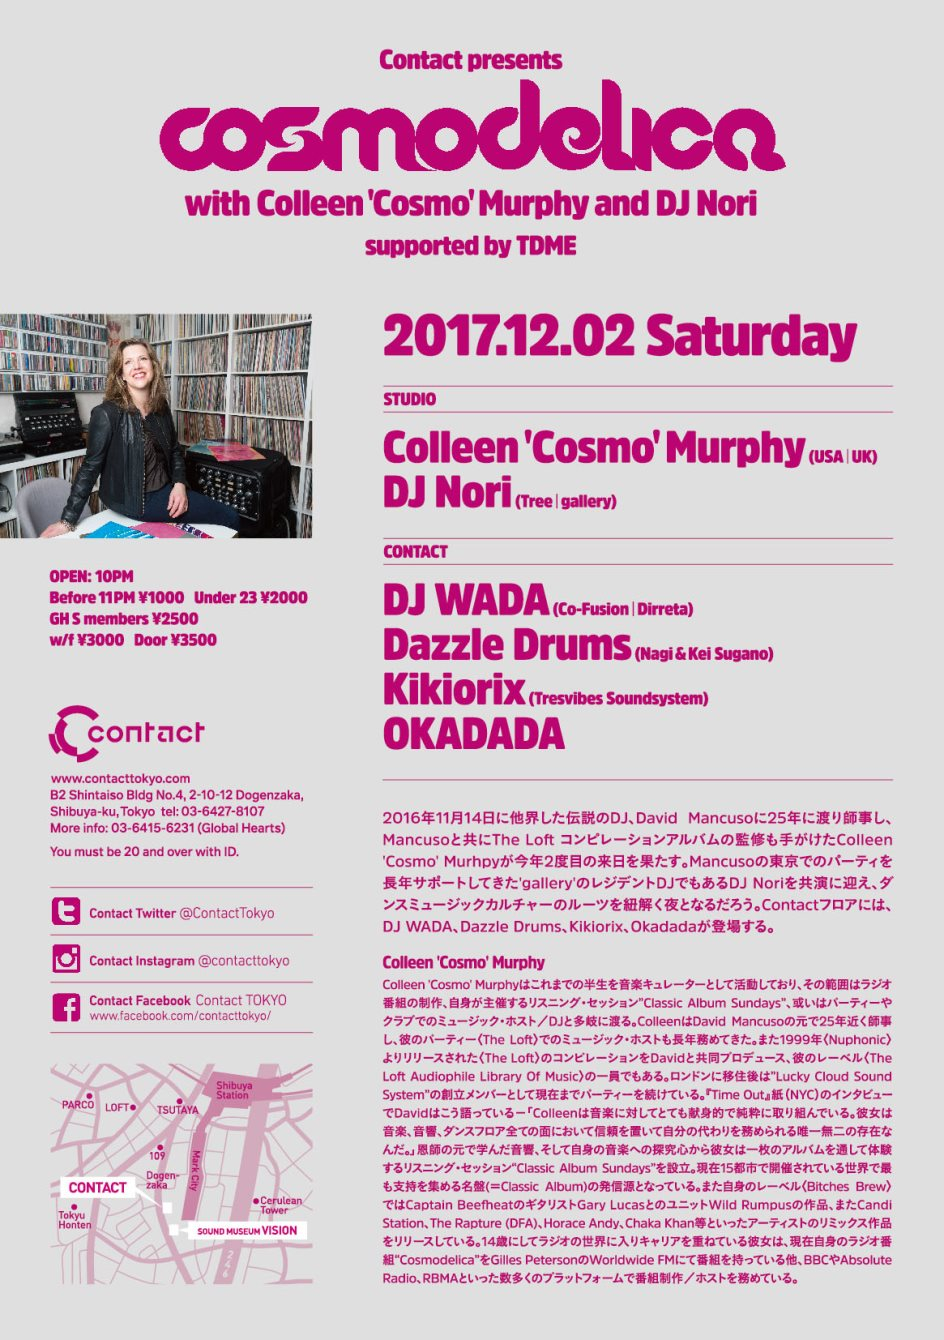 Contact presents Cosmodelica with Colleen 'Cosmo' Murphy and DJ Nori Supported by Tdme - Flyer back